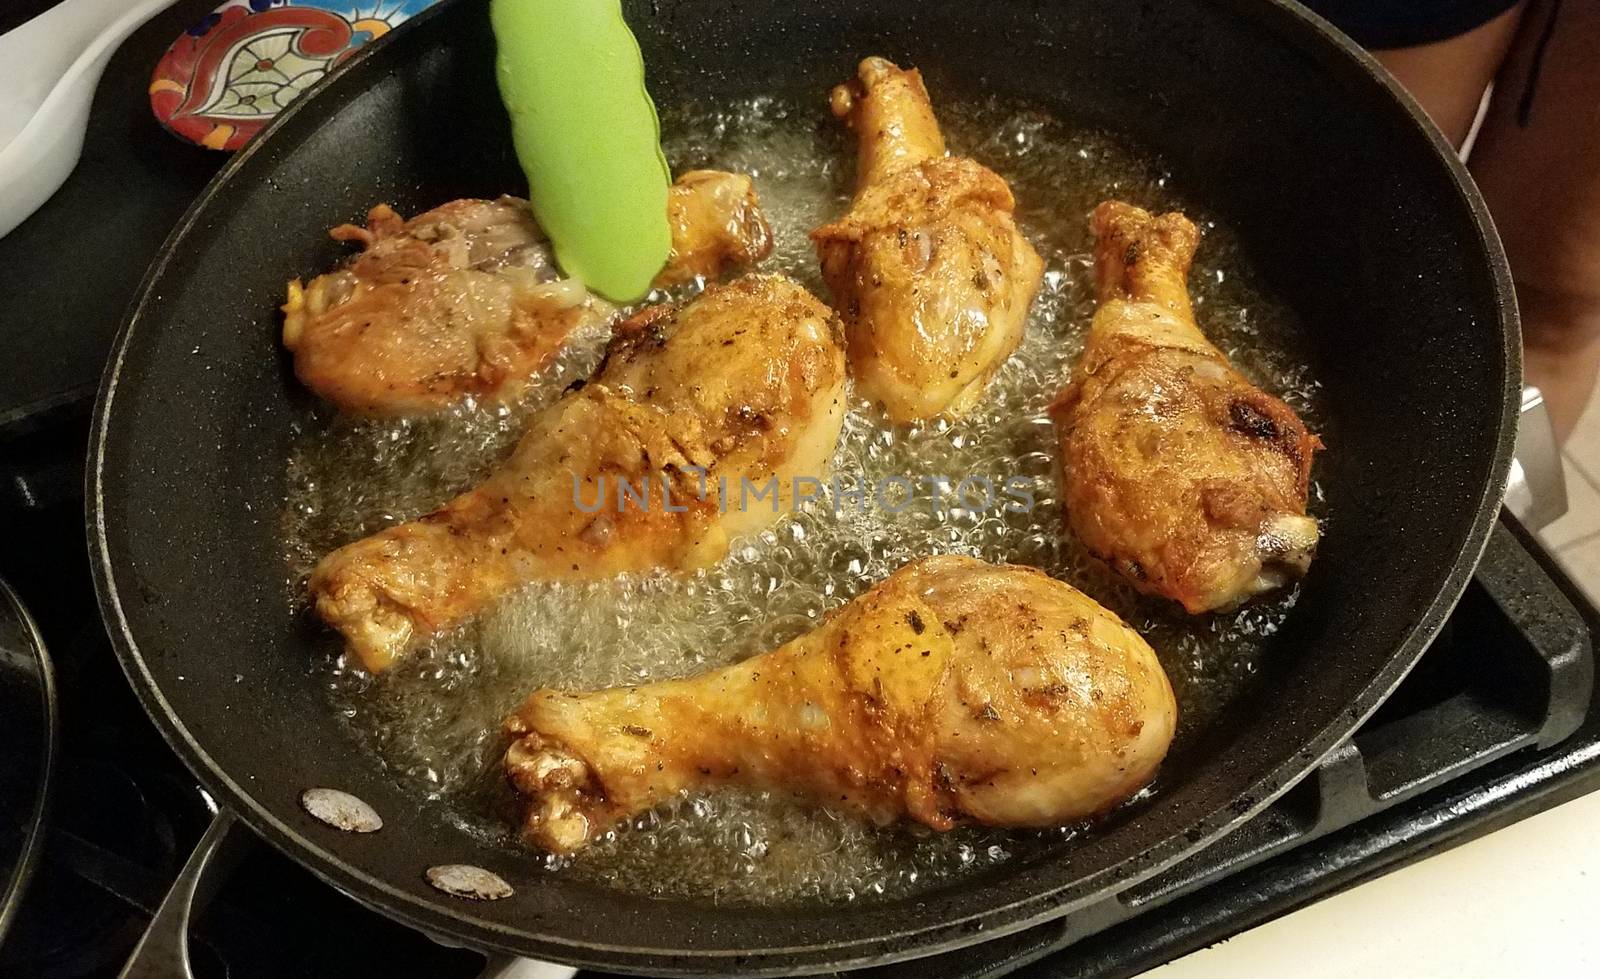 chicken drumsticks cooking in hot oil in frying pan on stove